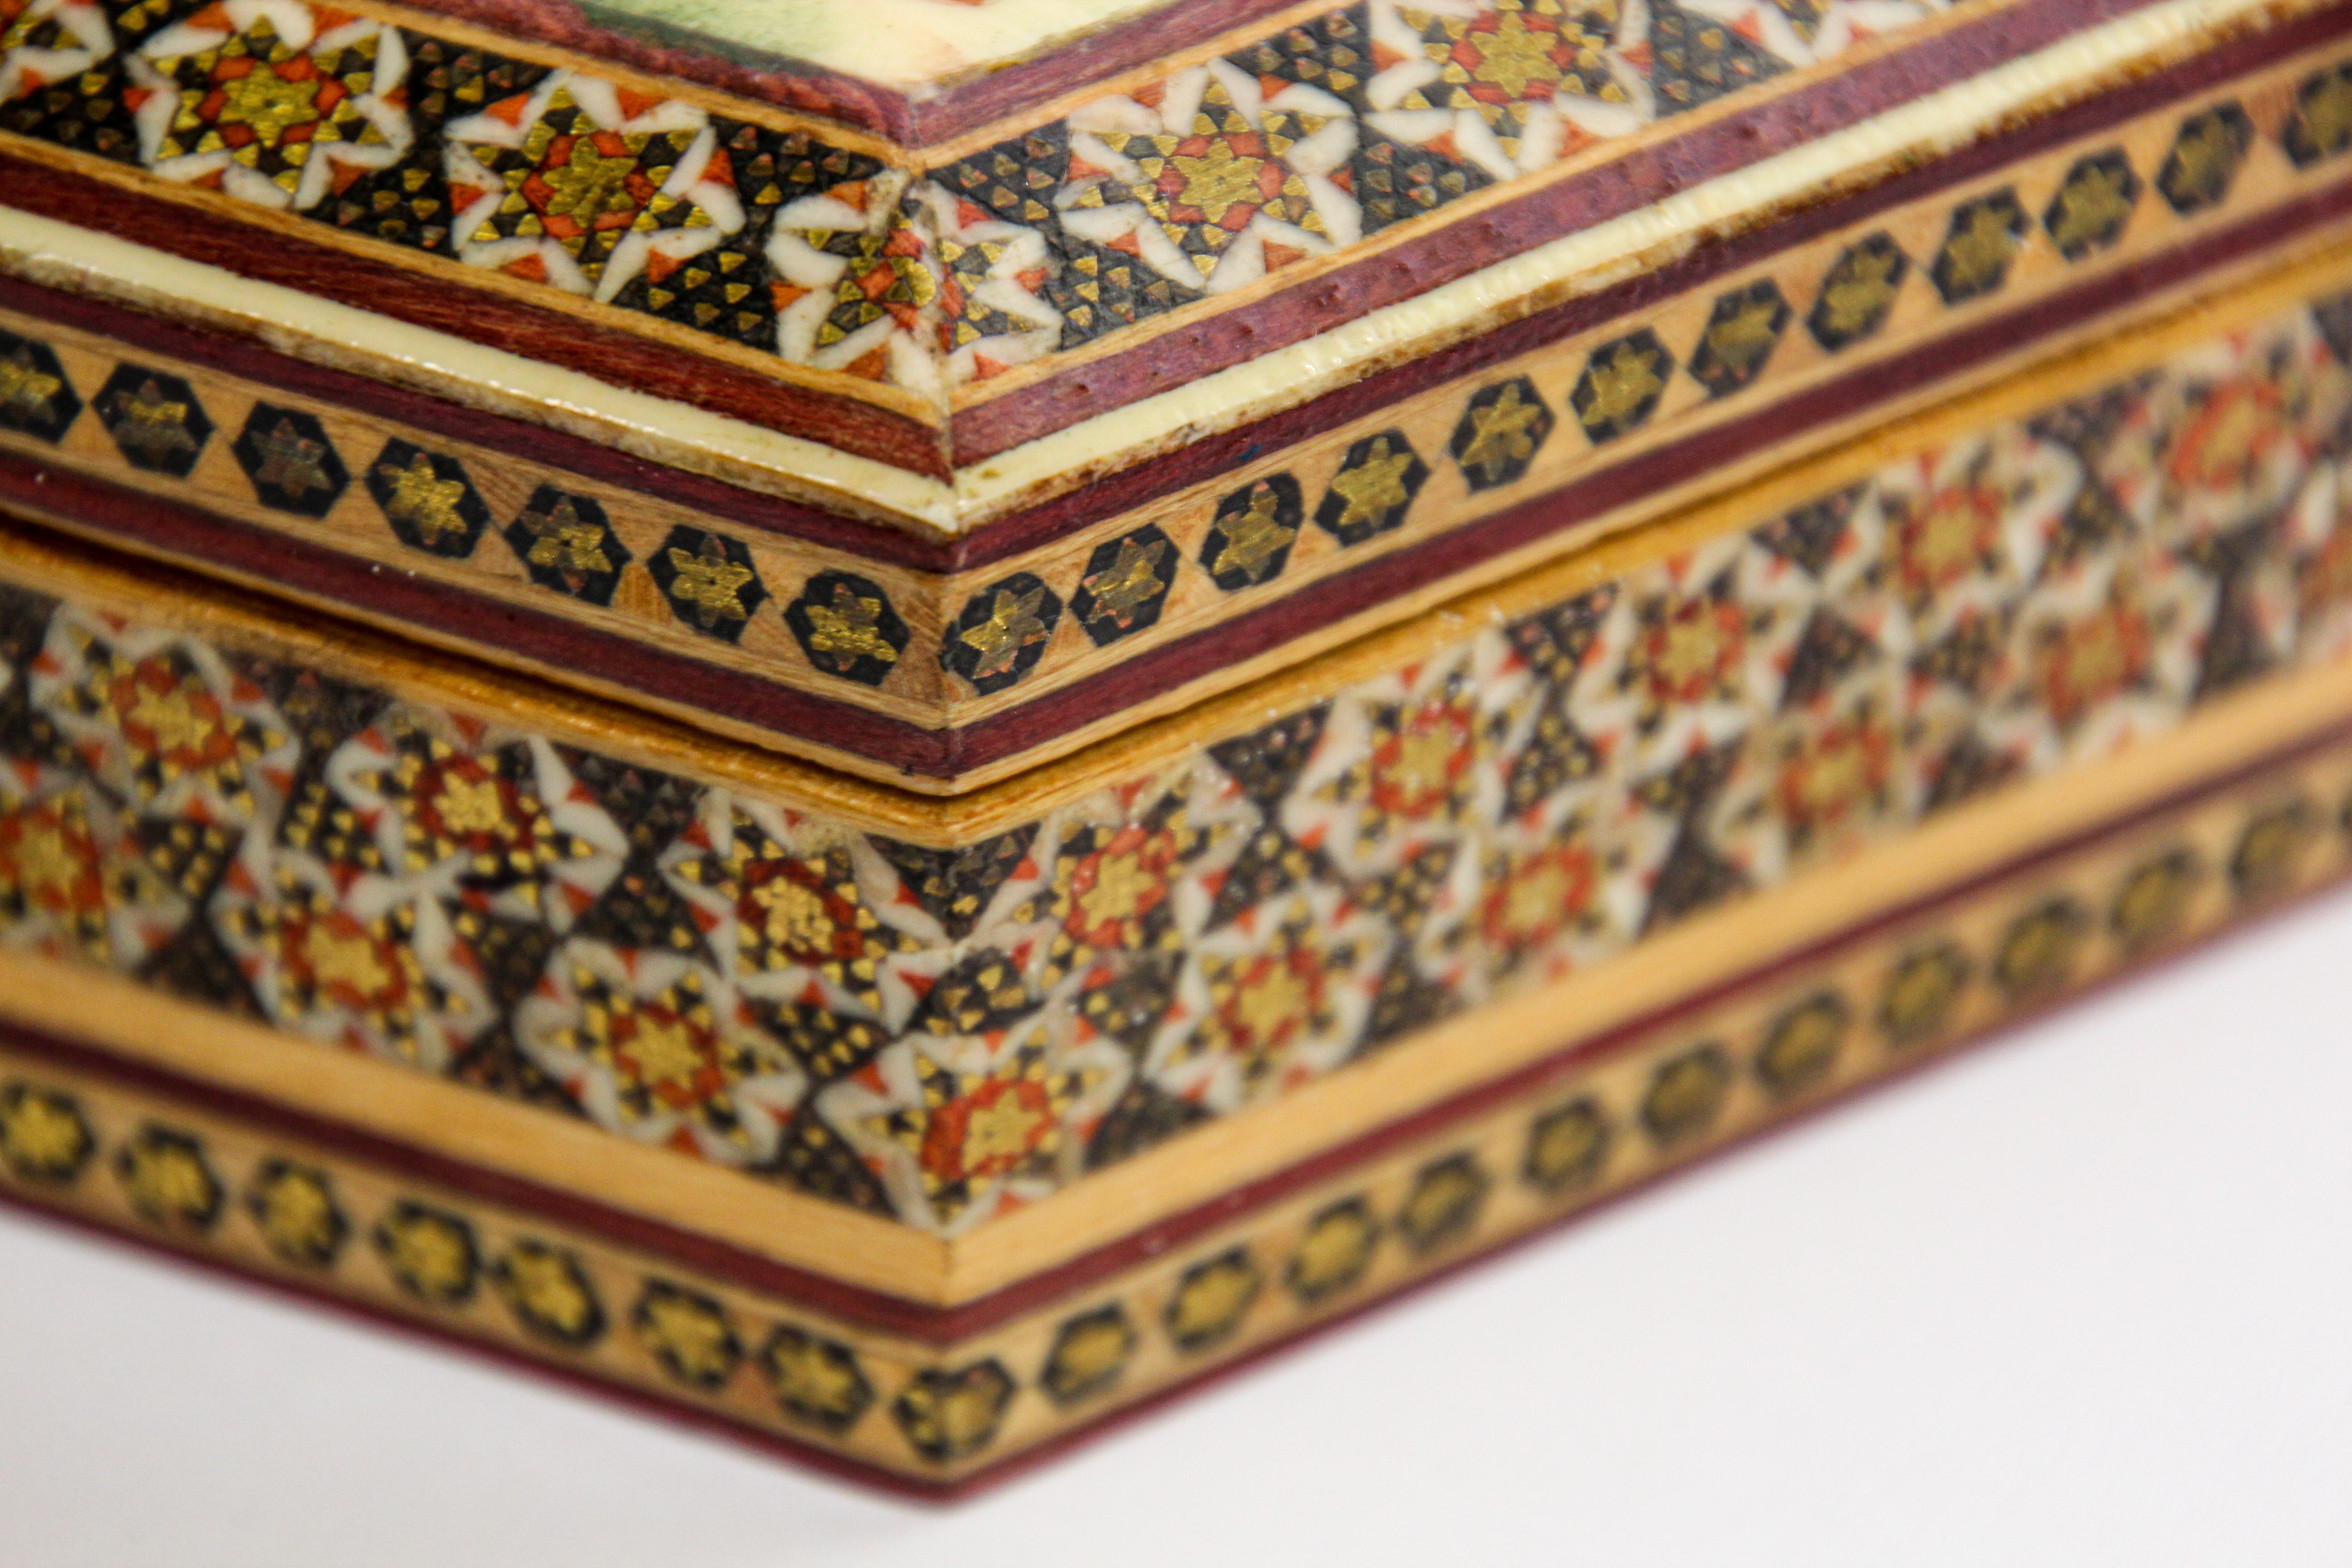 Khatam Persian Micro Mosaic Marquetry Inlaid Jewelry Trinket Box 1950's For Sale 5